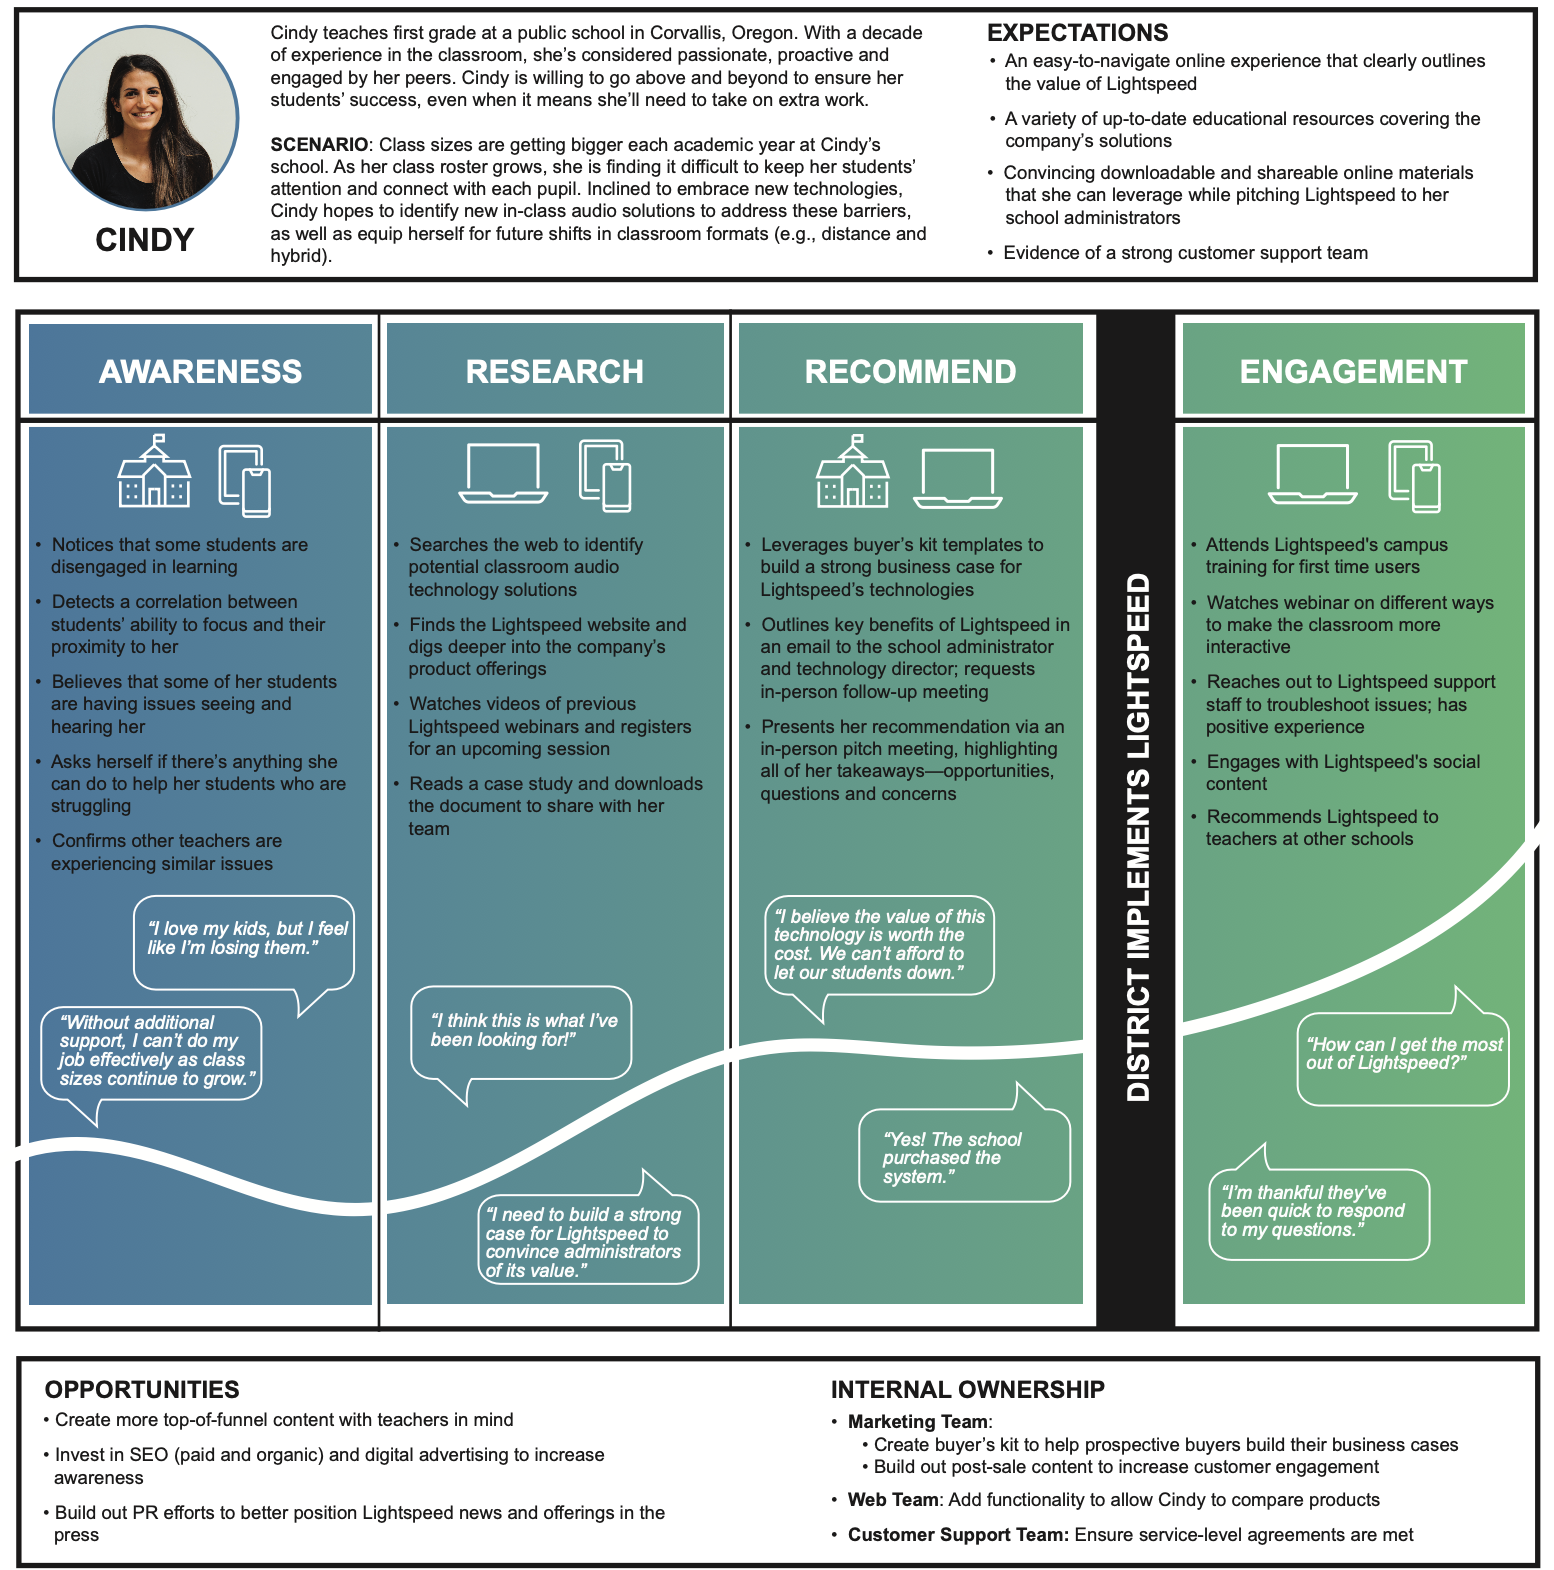 User journey map of persona Cindy's journey through stages of interaction with Lightspeed's content, including awareness, research, recommend, and engagement, a PDF link is below with full text